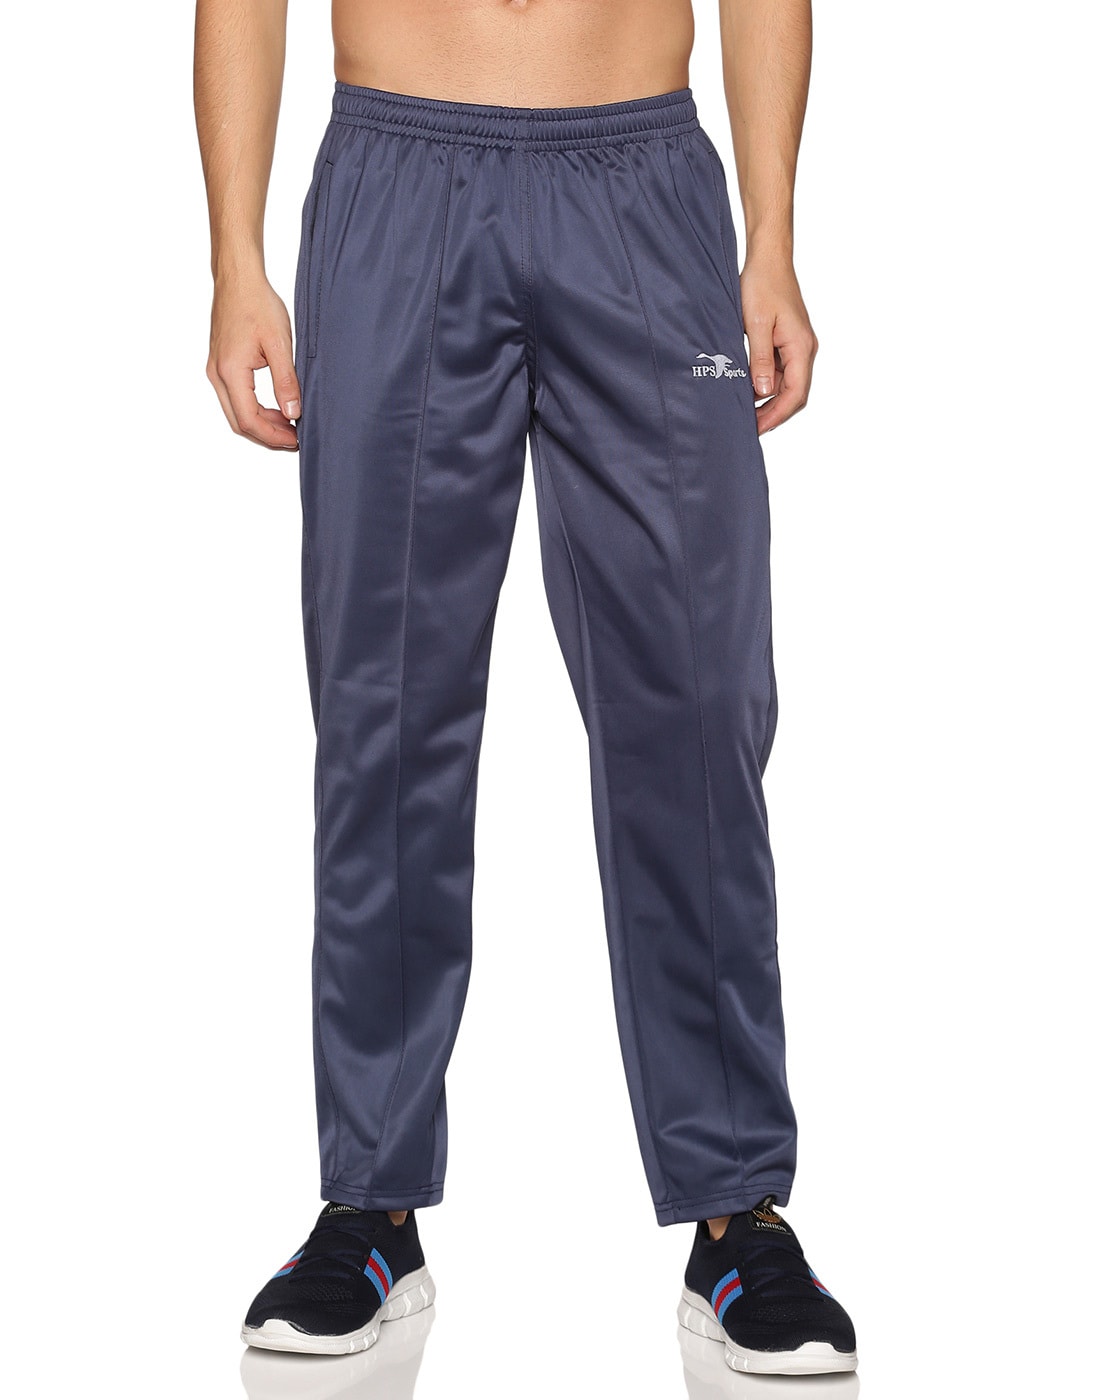 Mens Polyester Navy Track Pants Night Wear Pajama Sports Gym Lower with  Zip Pockets  Buy Mens Polyester Navy Track Pants Night Wear Pajama  Sports Gym Lower with Zip Pockets Online at